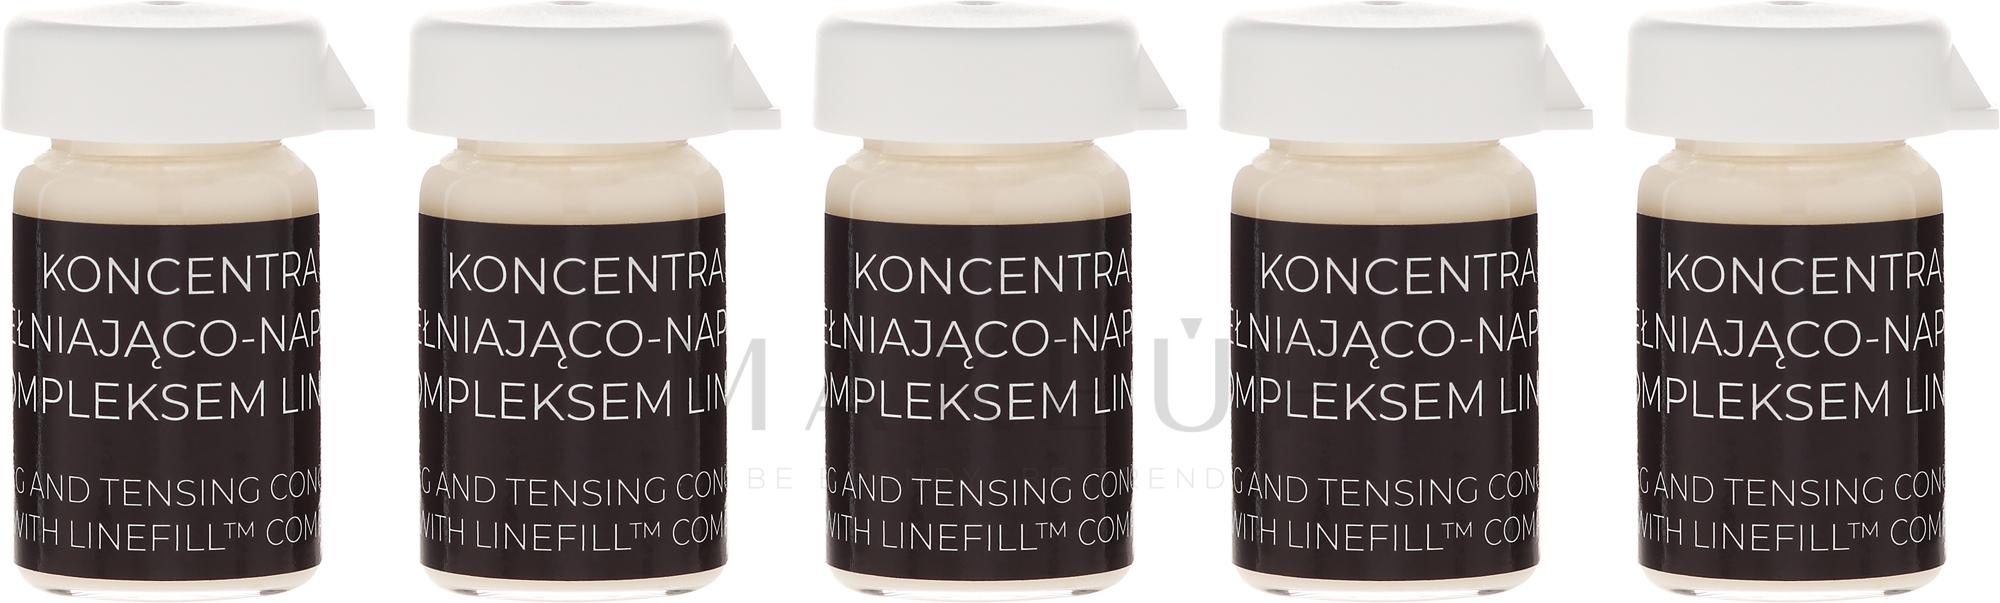 Gesichtskonzentrat mit Linefill - APIS Professional Concentrate Ampule Linefill — Foto 5 x 5 ml